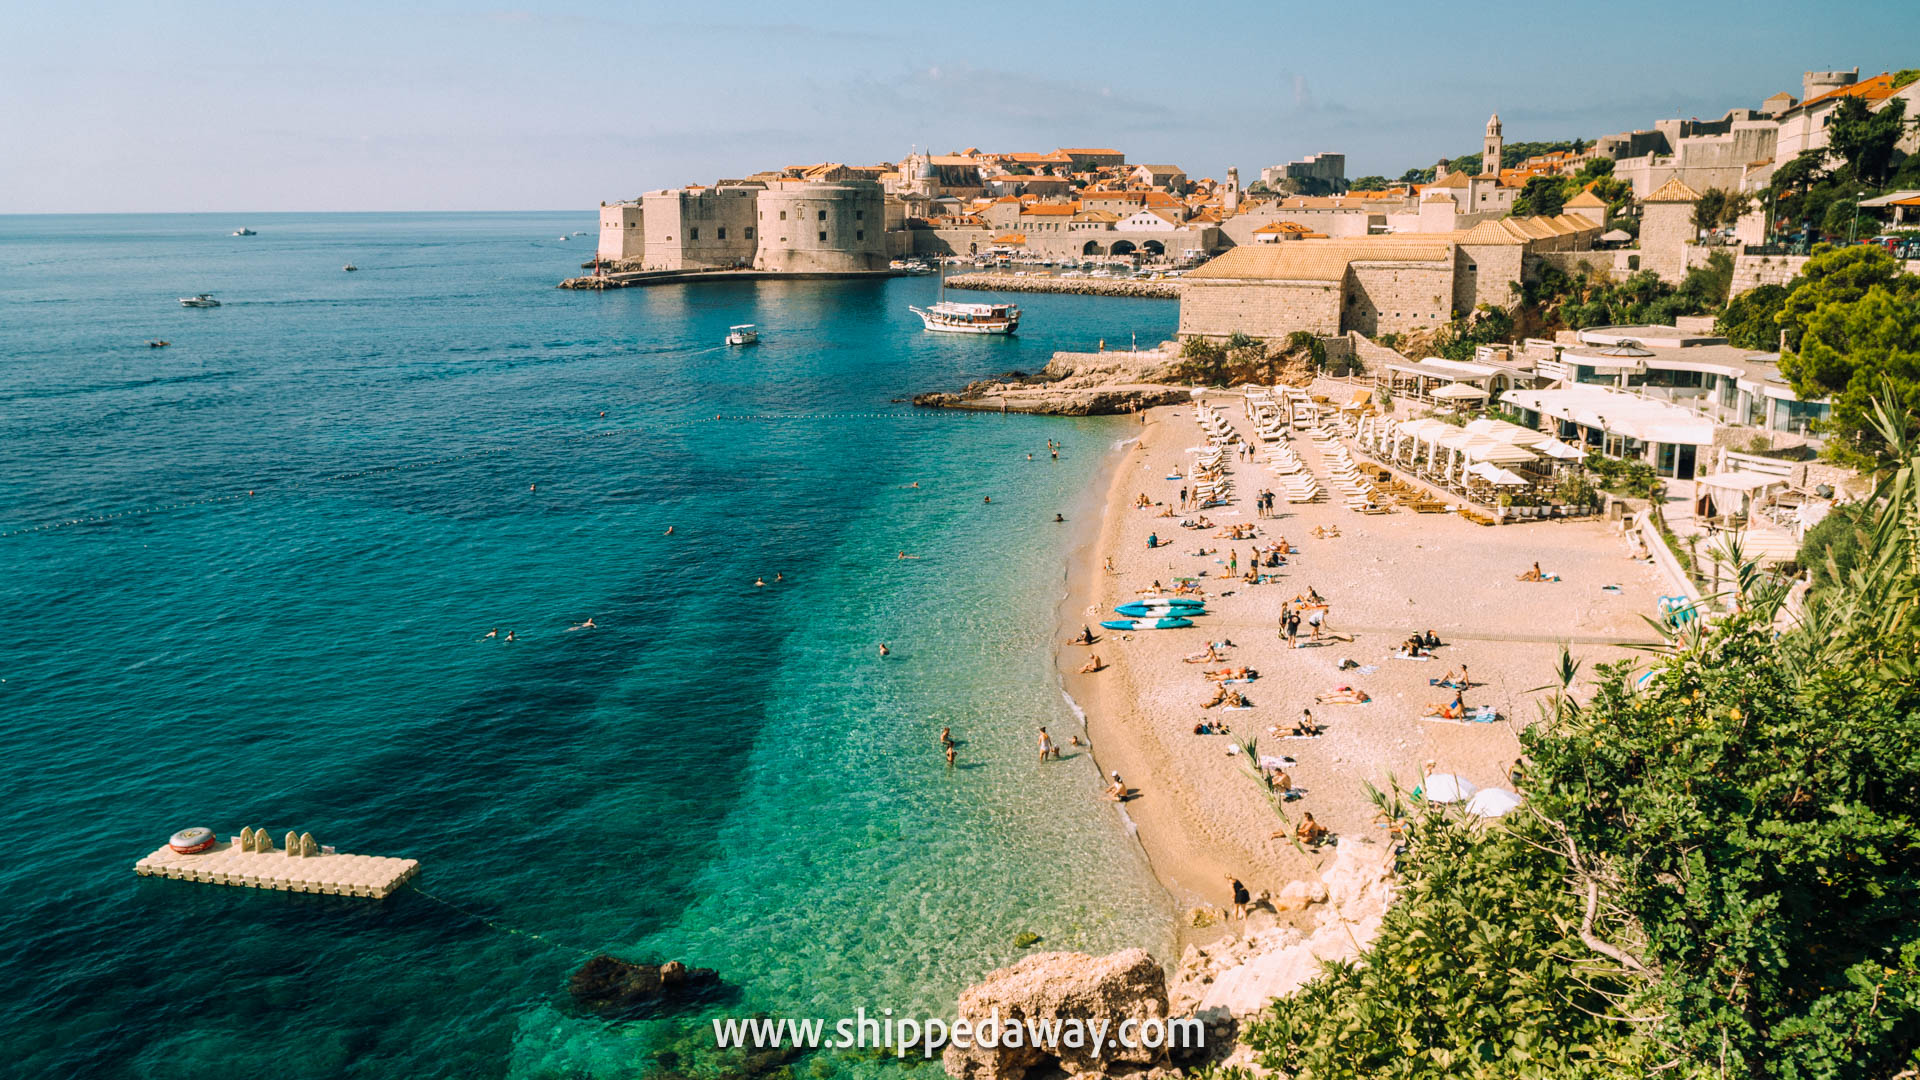 Top Things To Do in Dubrovnik, Croatia - Dubrovnik Travel Guide - Places to visit in Dubrovnik - Best places to visit in Dubrovnik as recommended by a local